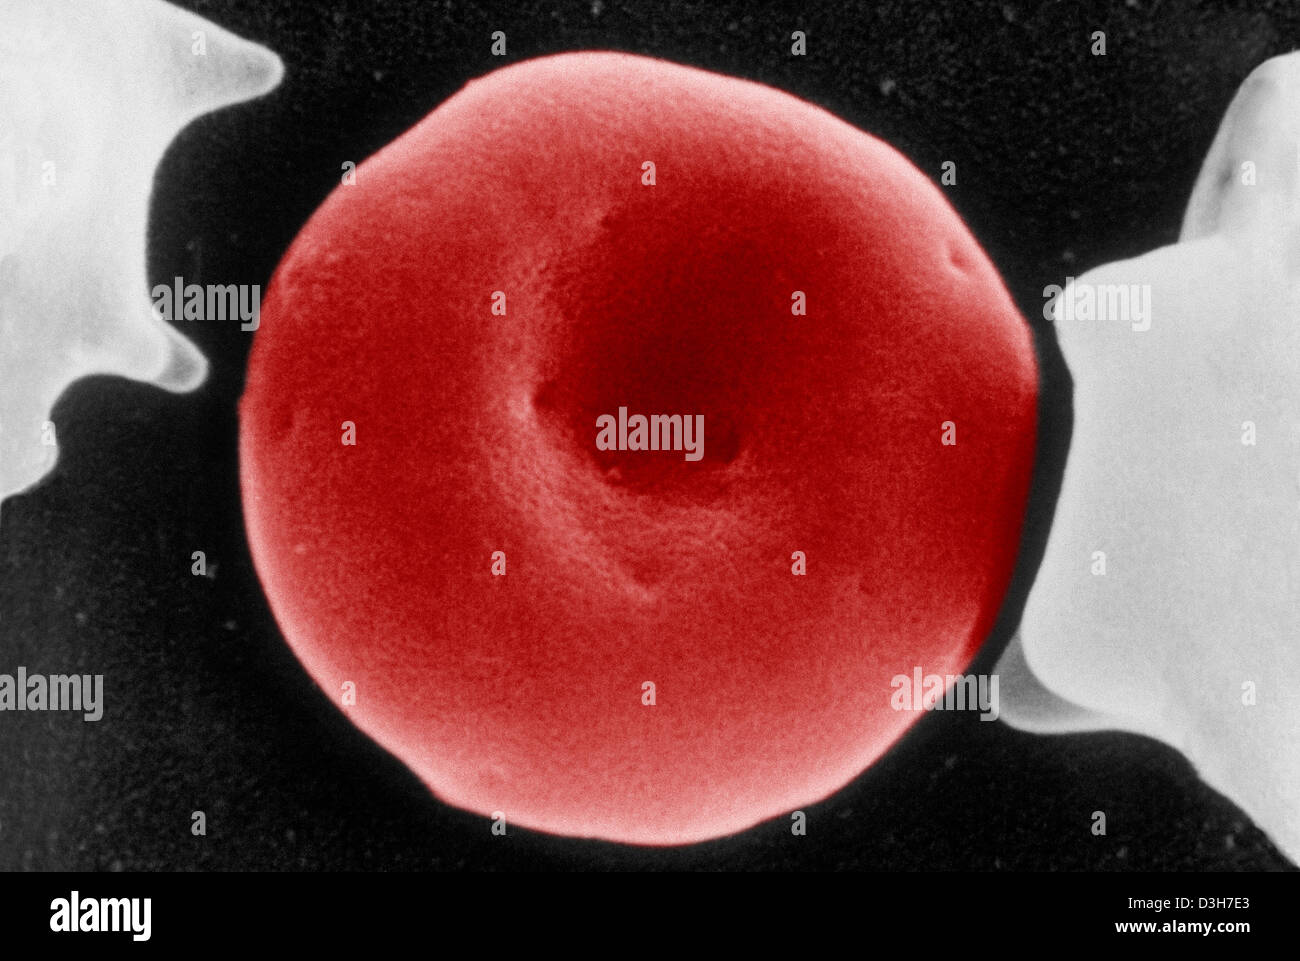 RED BLOOD CELL Stock Photo